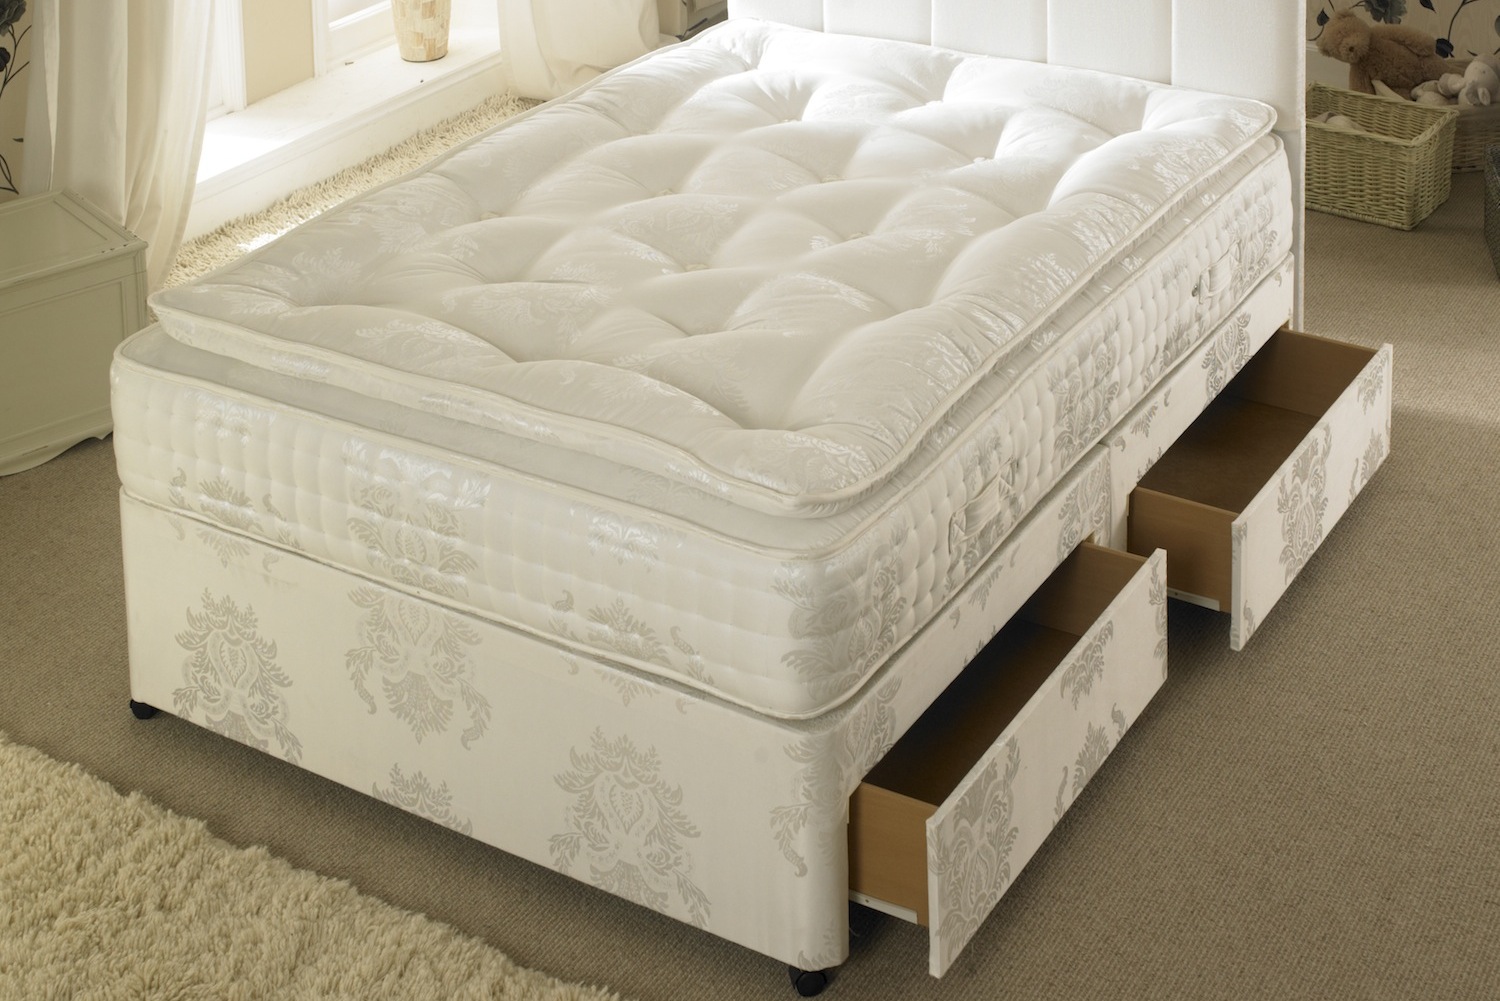 Joseph VIP 3000 Pillow Top Divan Bed-Small Double-2 Drawers Either Side